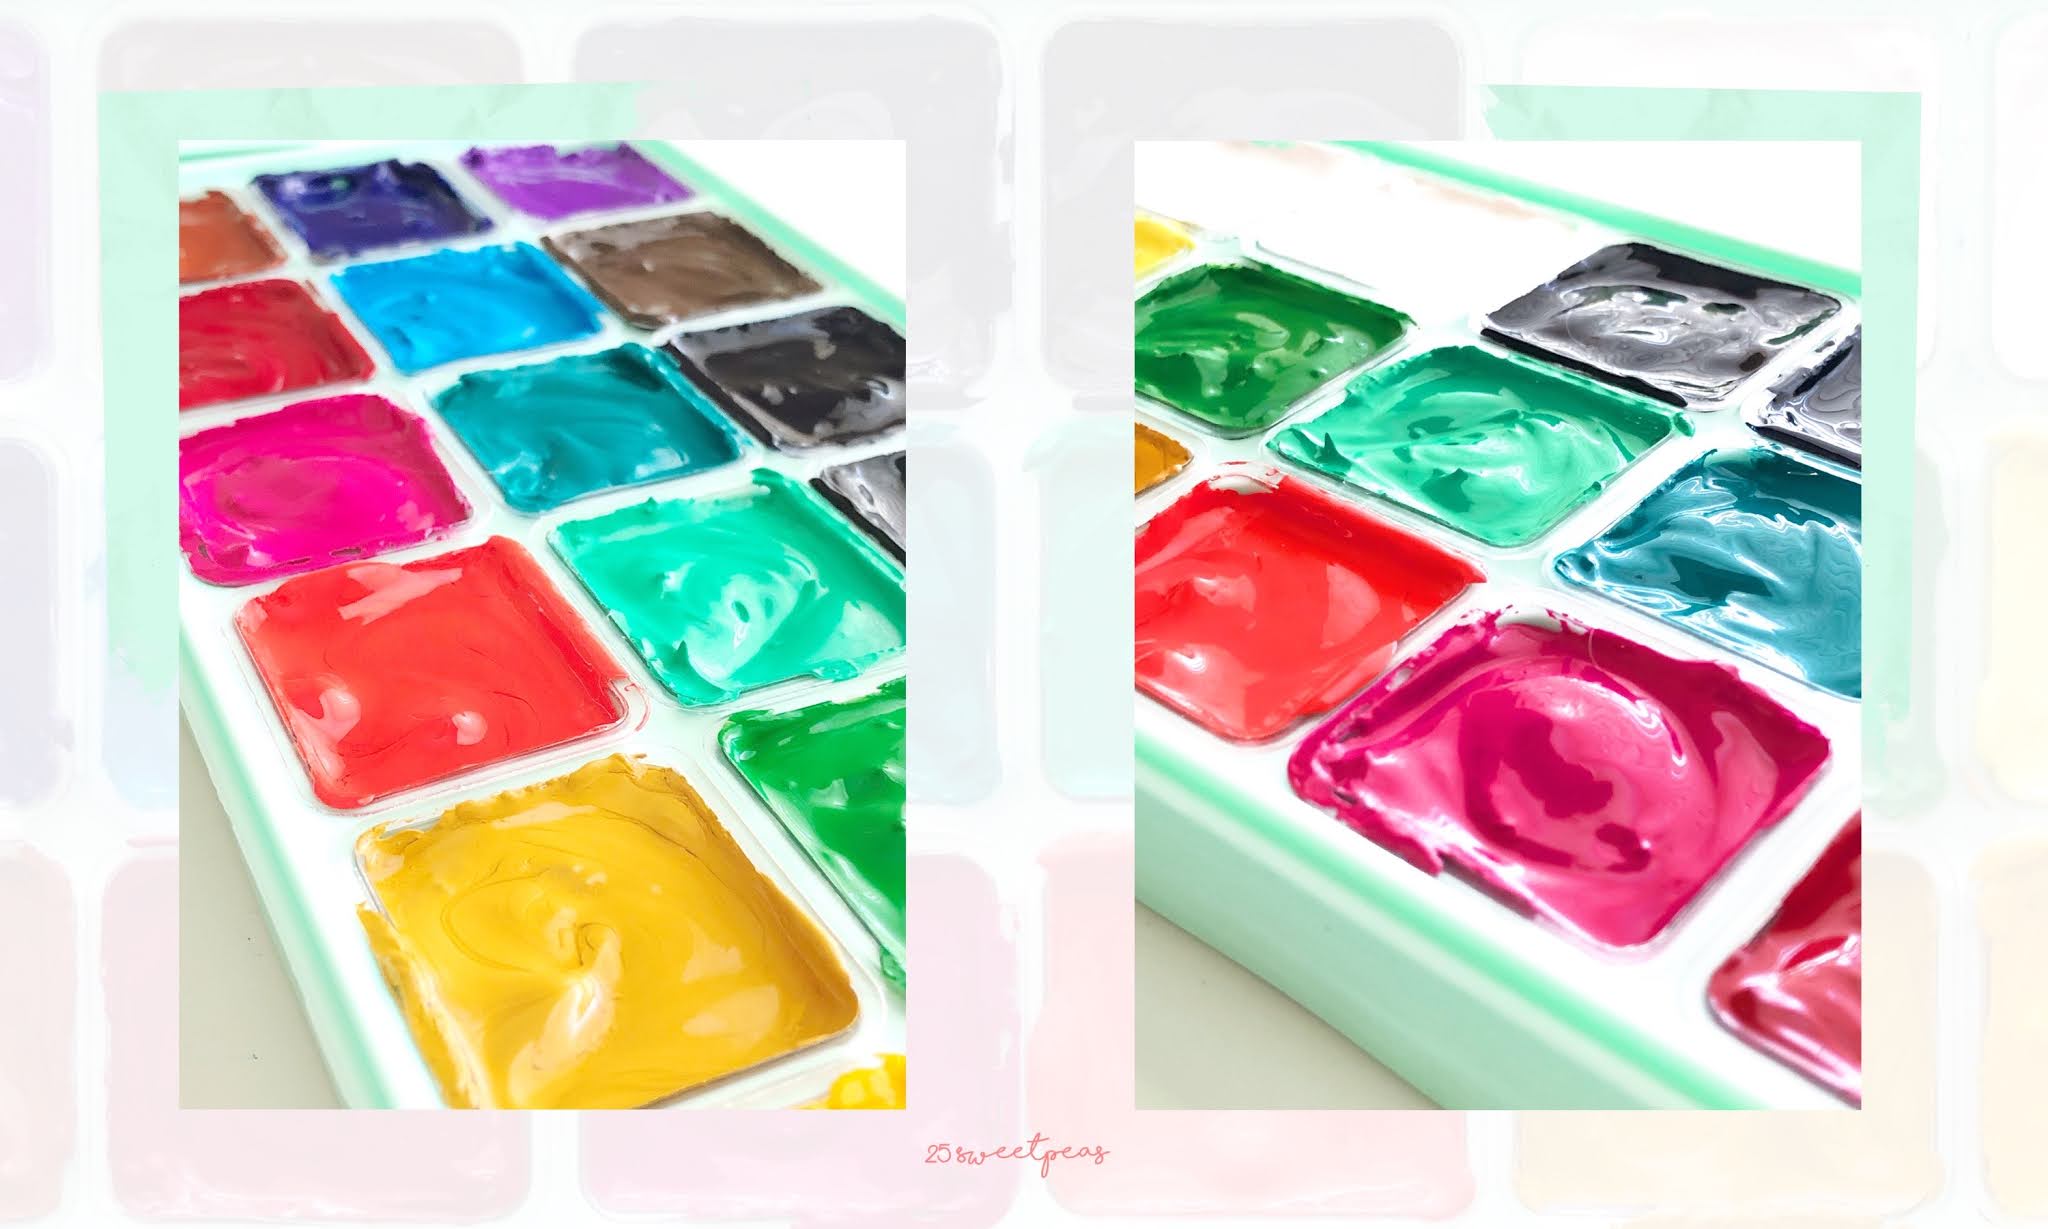 Miya Himi Gouache Set Review: What is Jelly Paint?